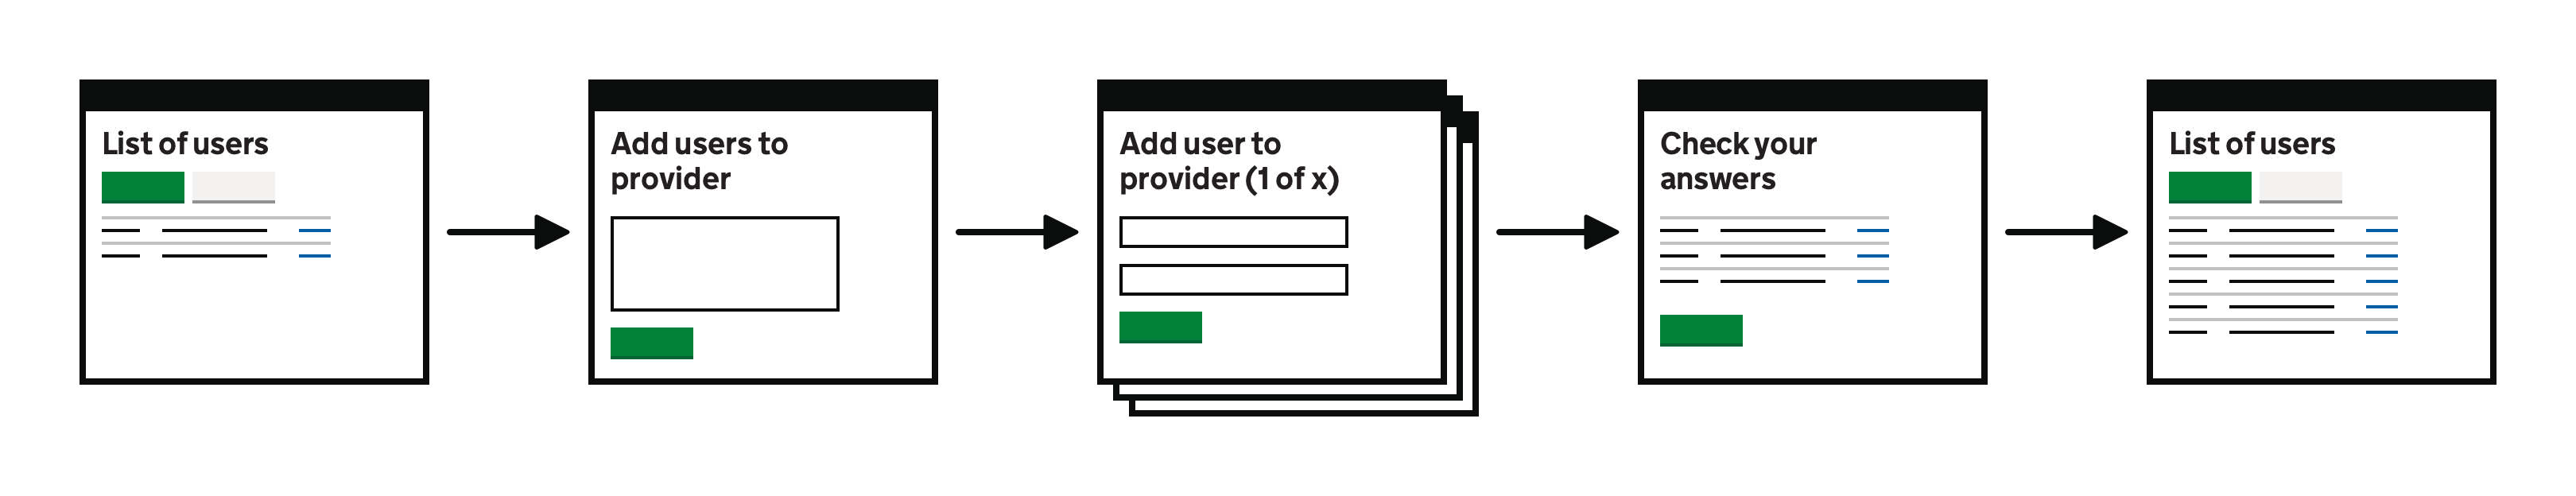 Adding multiple users to a provider